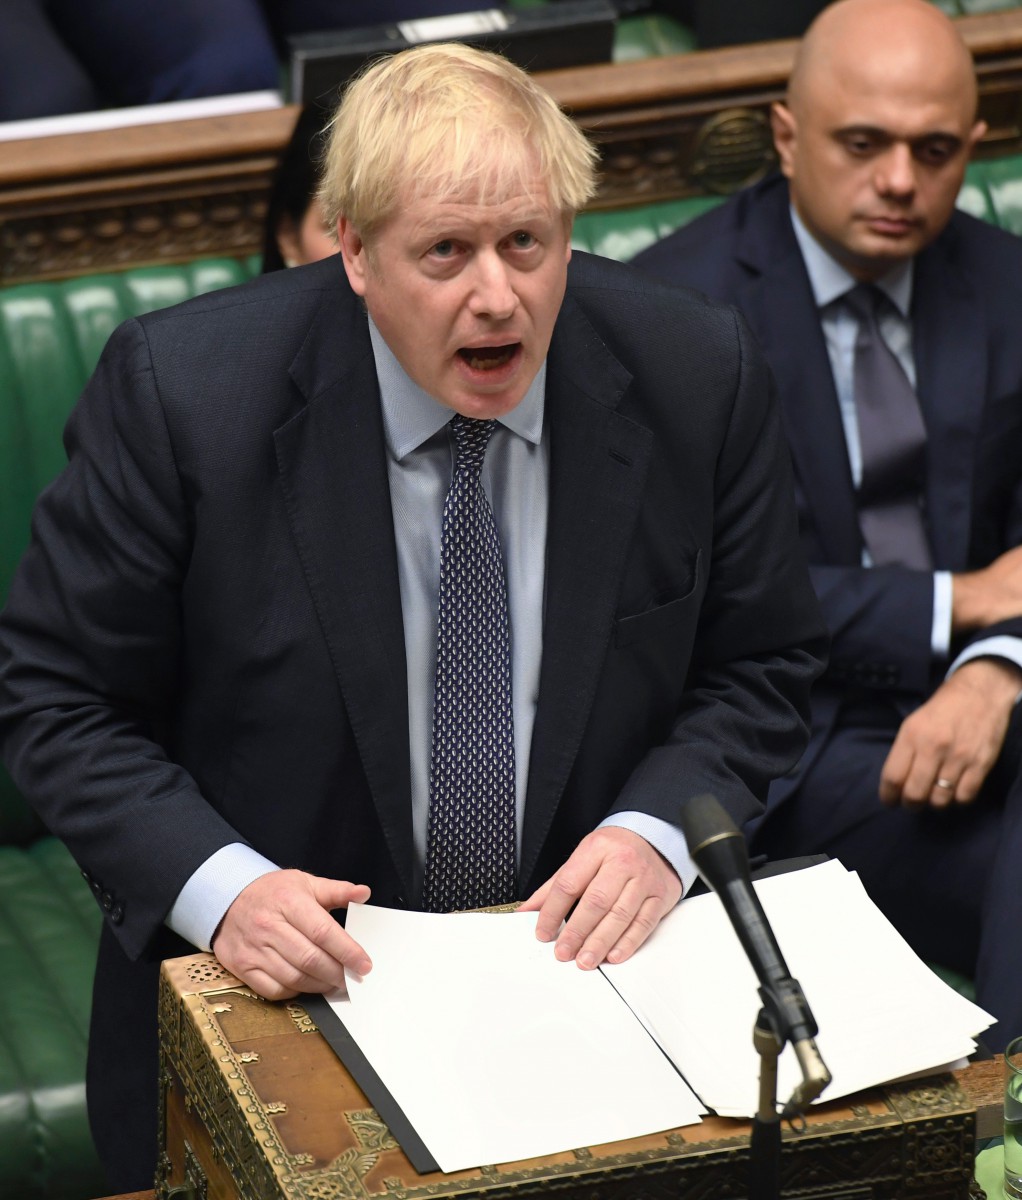 Boris Johnson has repeatedly insisted that Britain will leave the EU on October 31